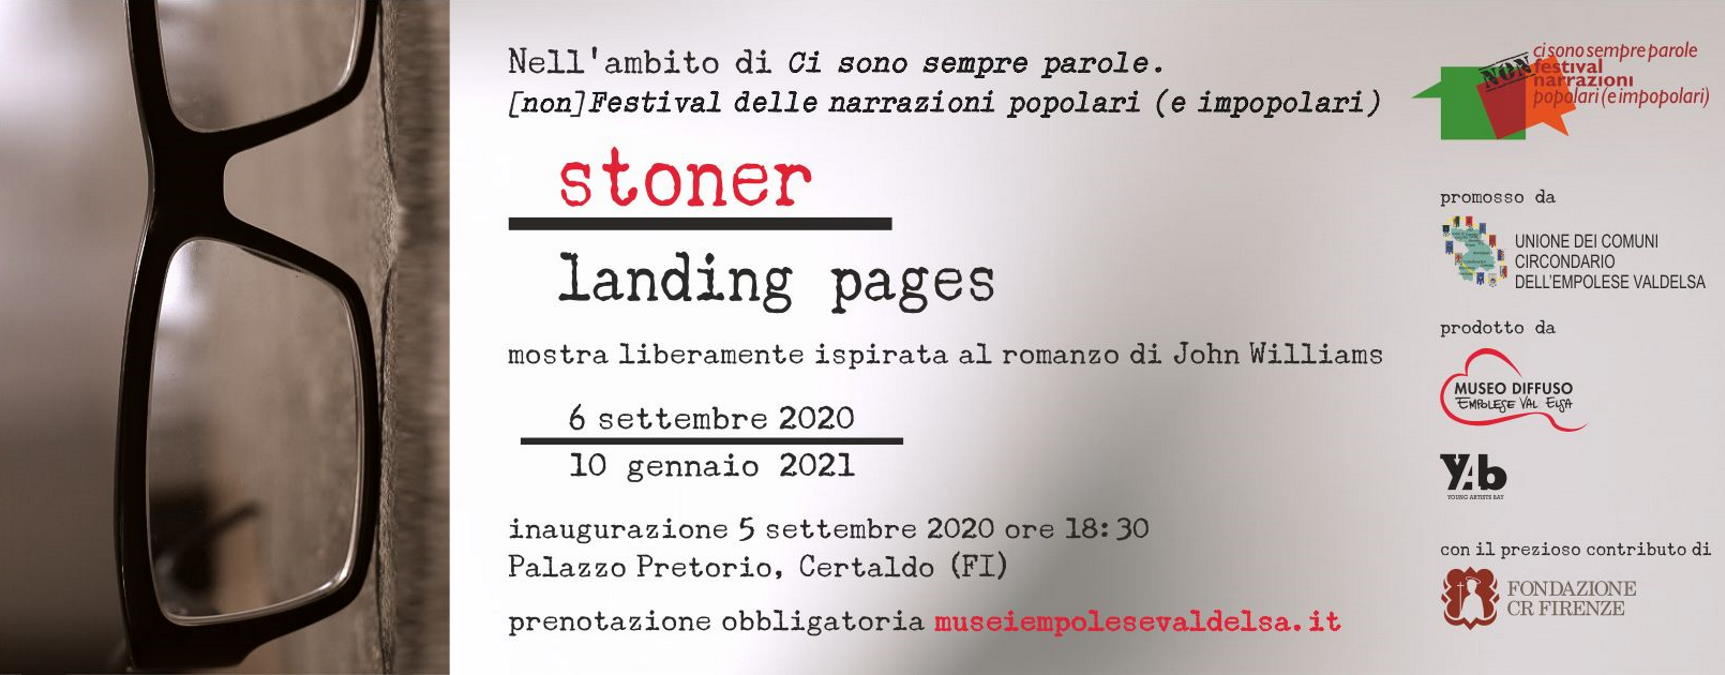 Stoner. Landing pages